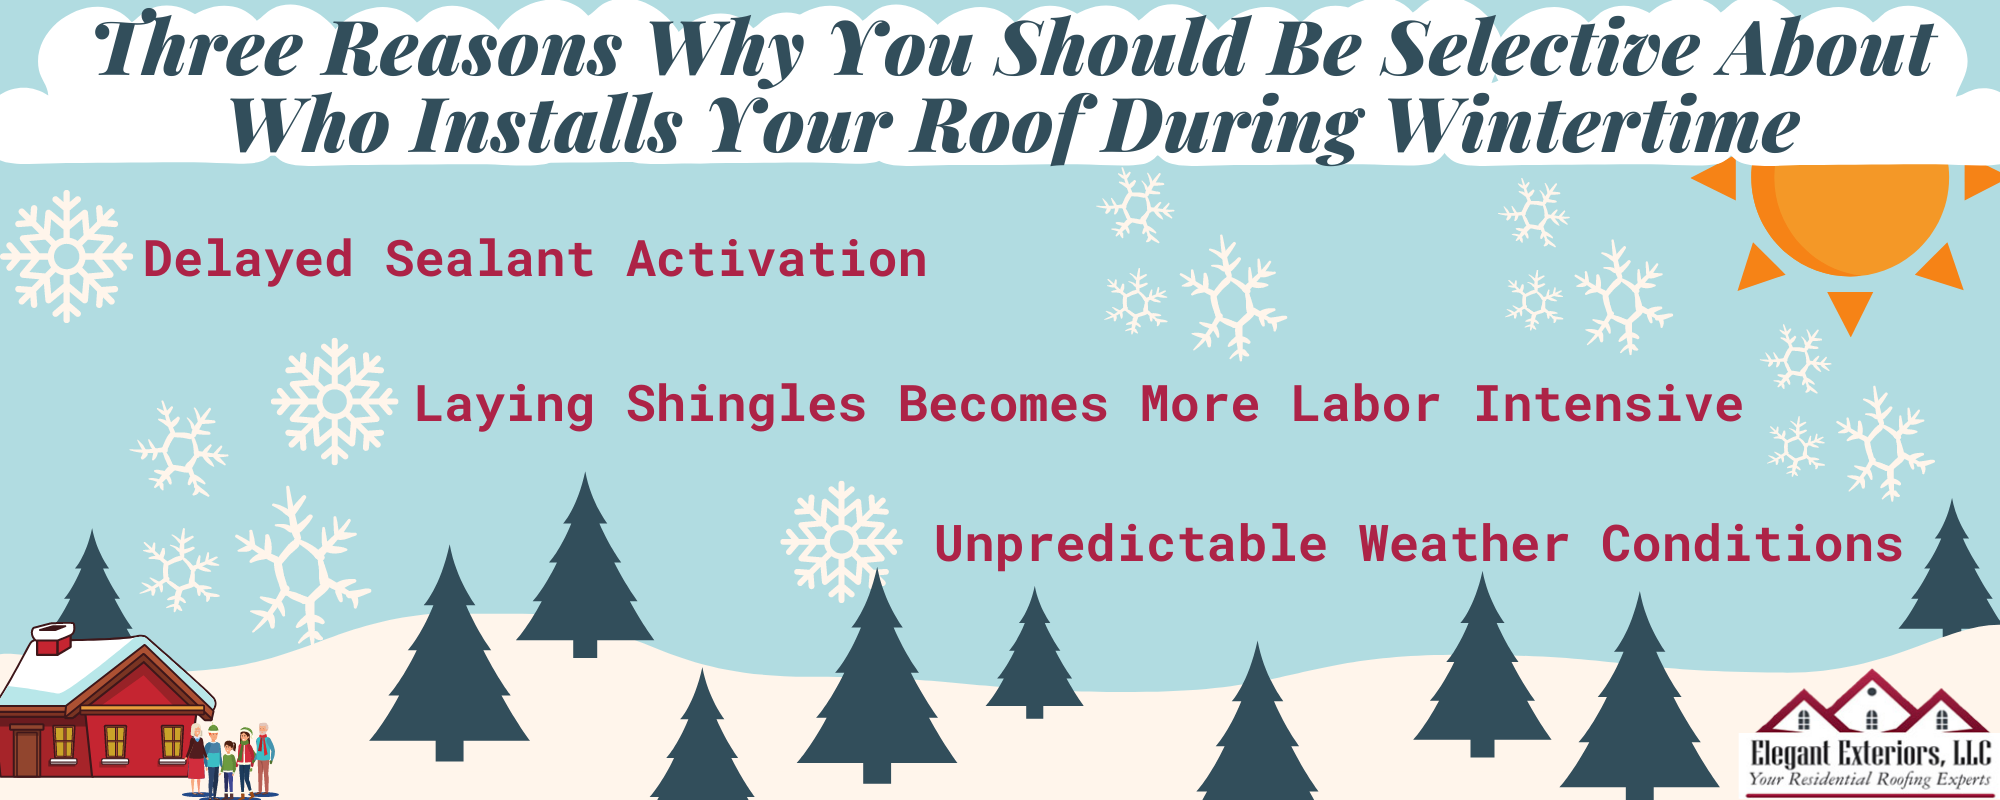 Infographic explaining points about choosing the right company to install a roof during the winter.